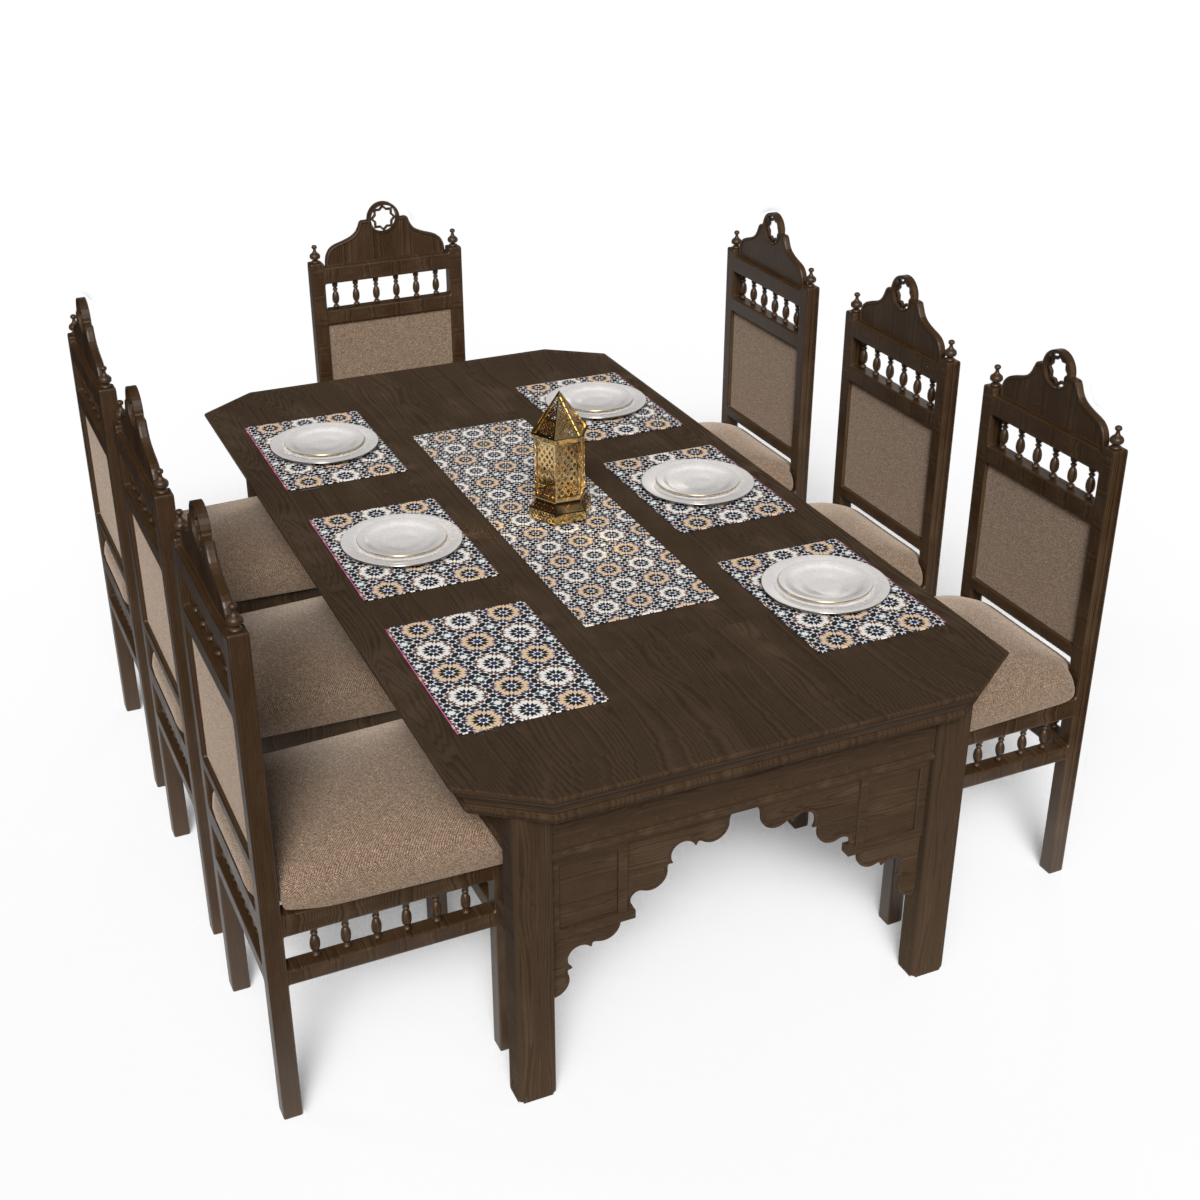 Runner and coaster set - 7 pieces - ROM33